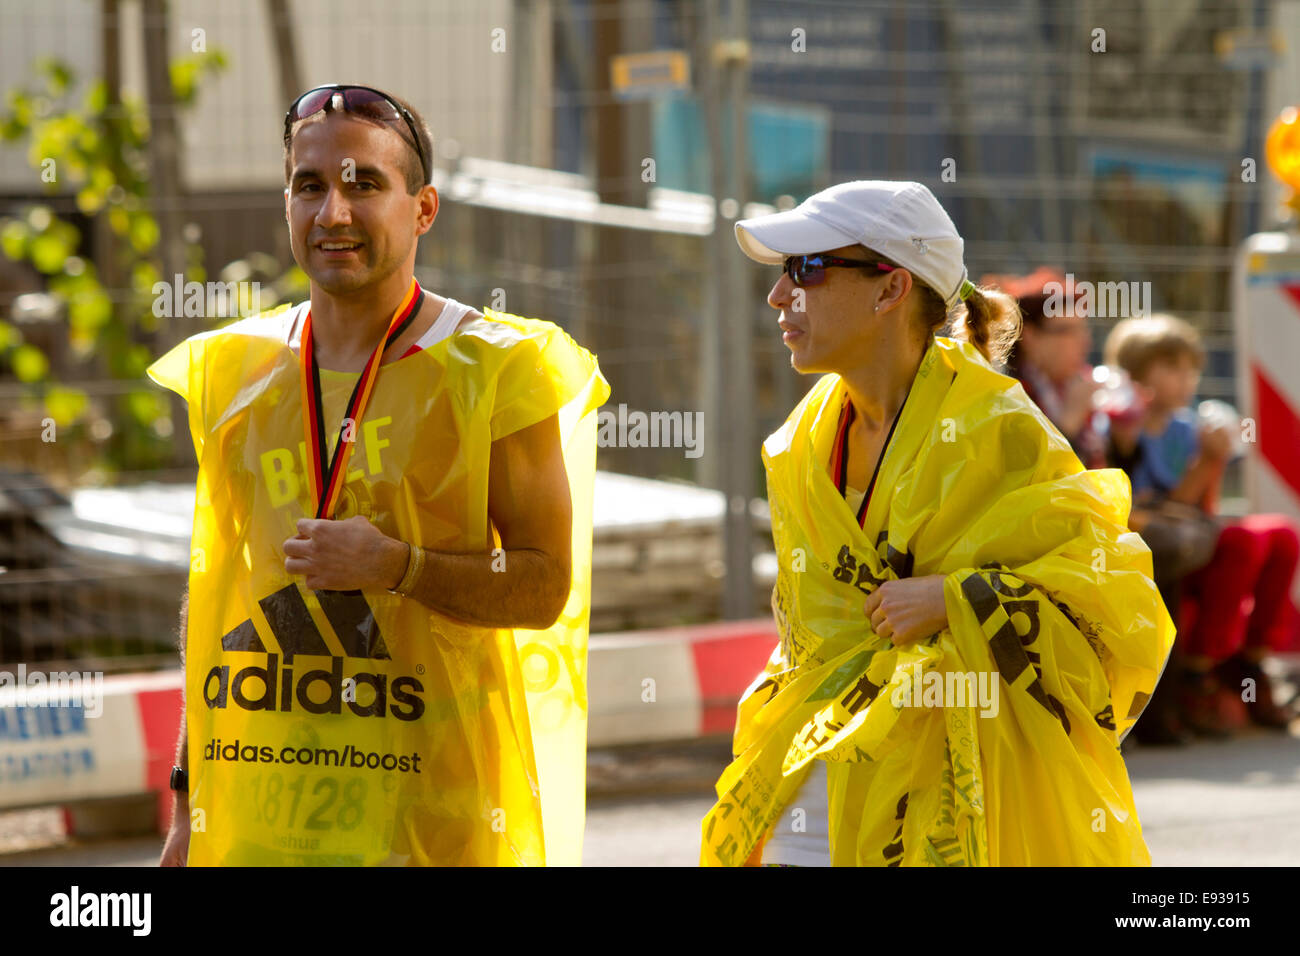 Marathon runners wrapped in plastic after race Stock Photo